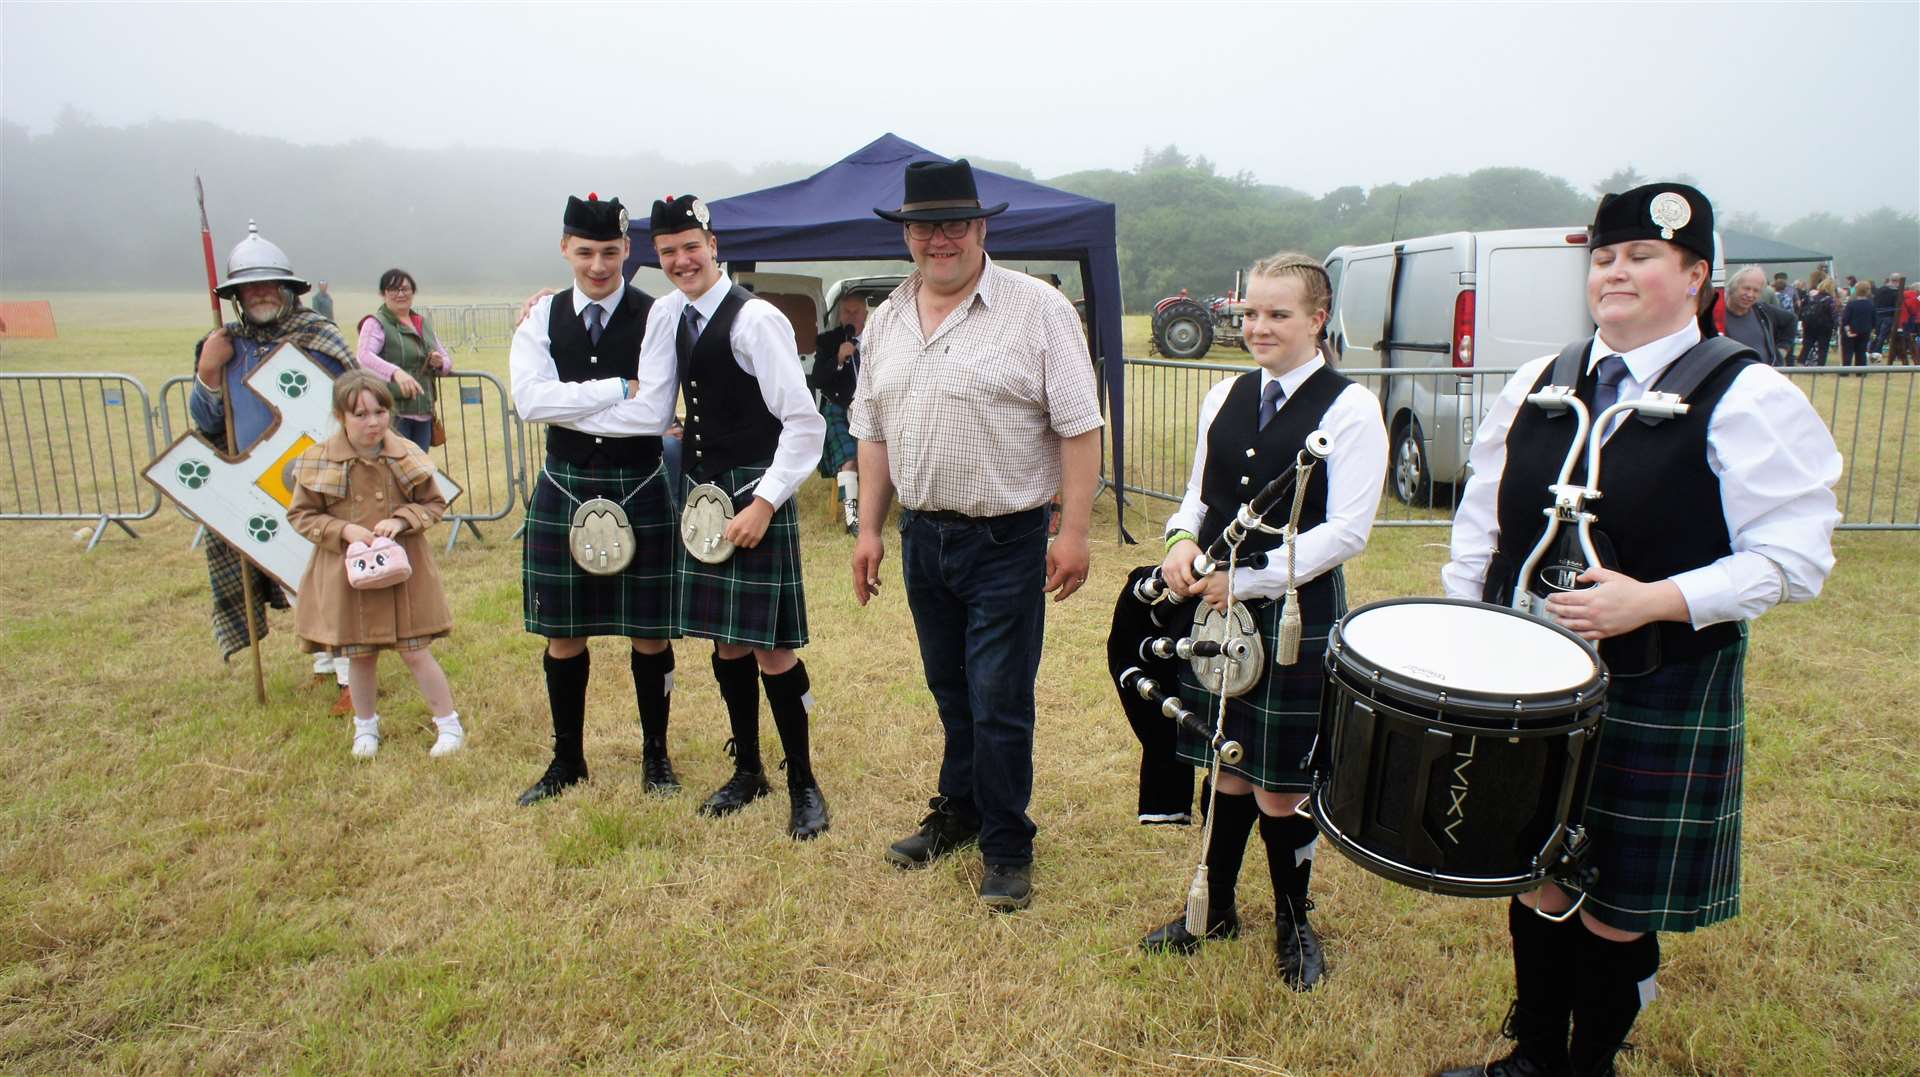 Members of the pipe band were pulled into the best dressed competition. Picture: DGS